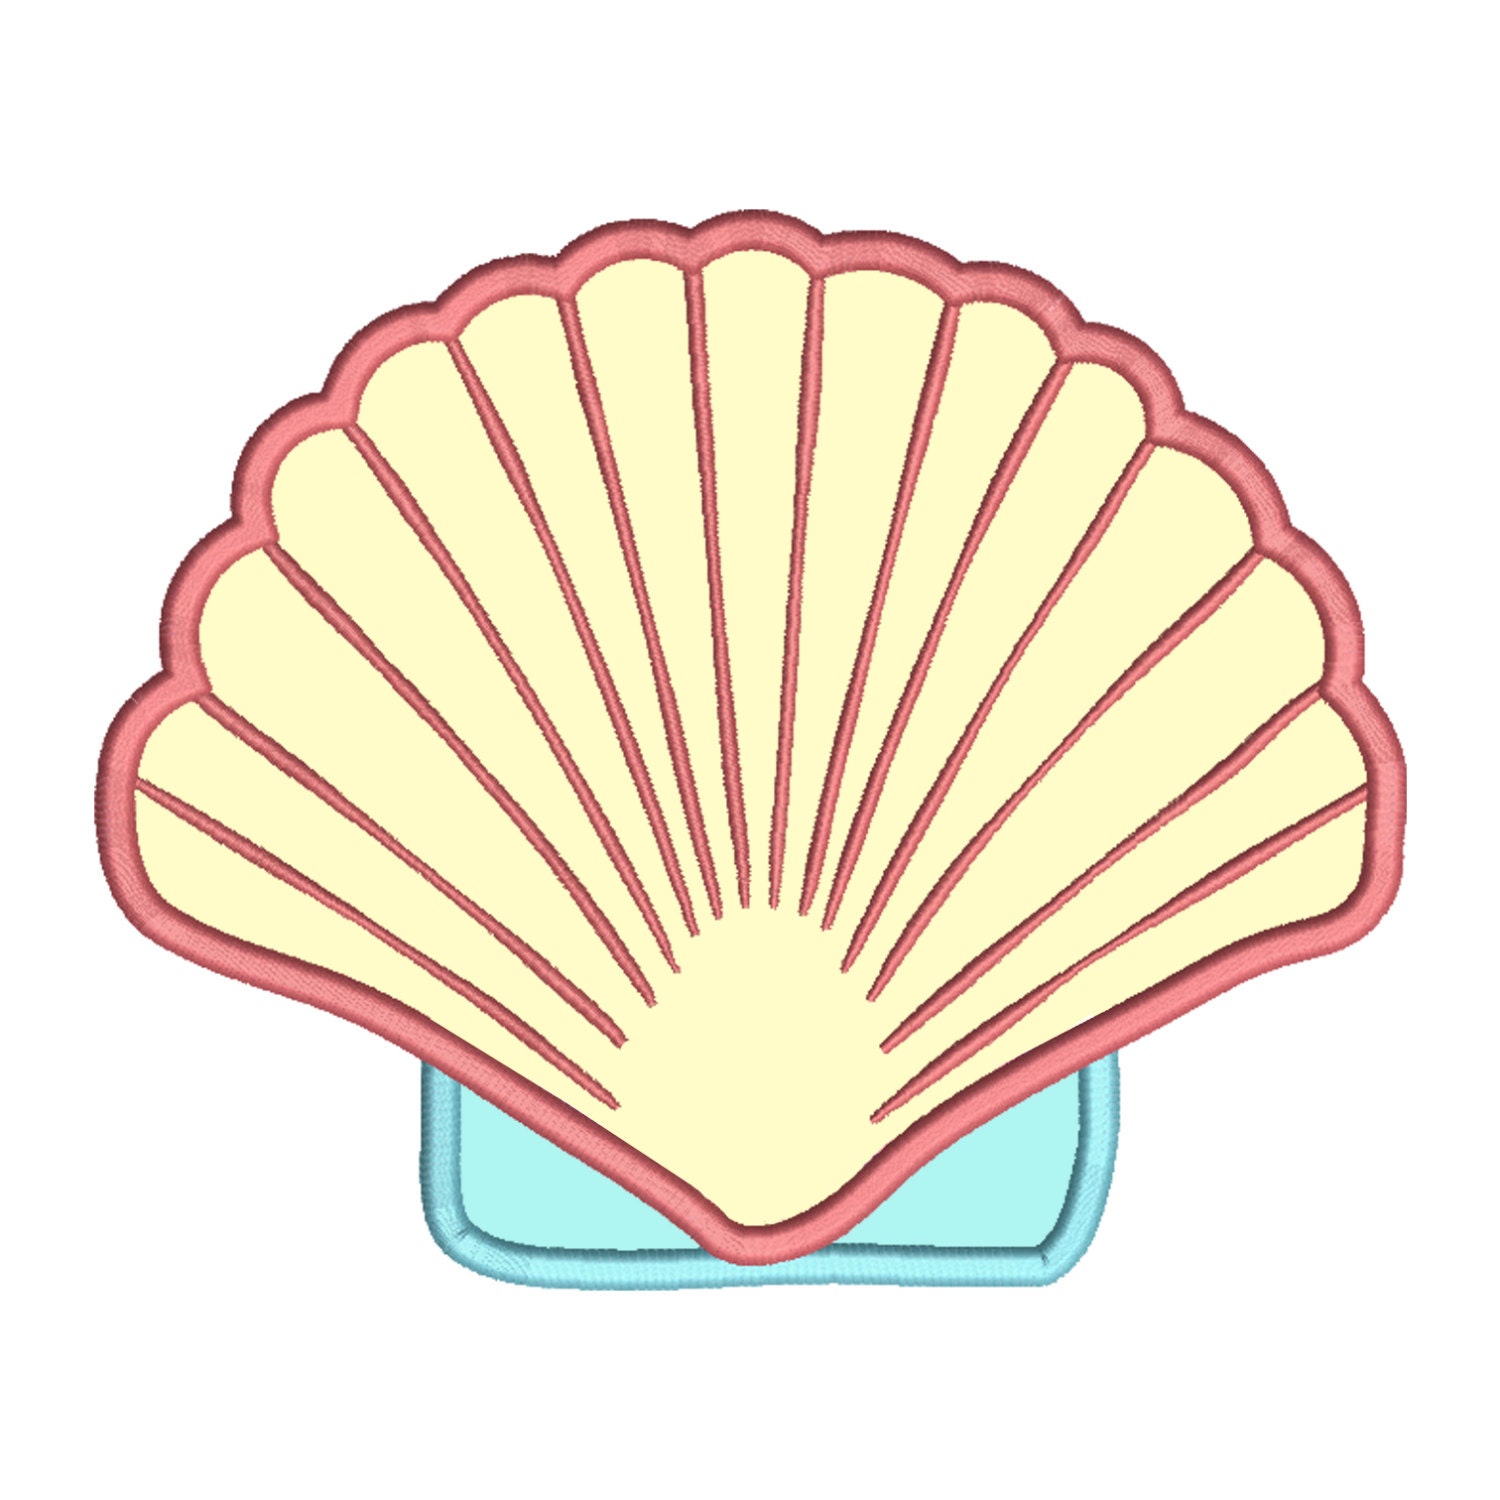 Shell Applique Embroidery Design Download by LaughLoveApplique